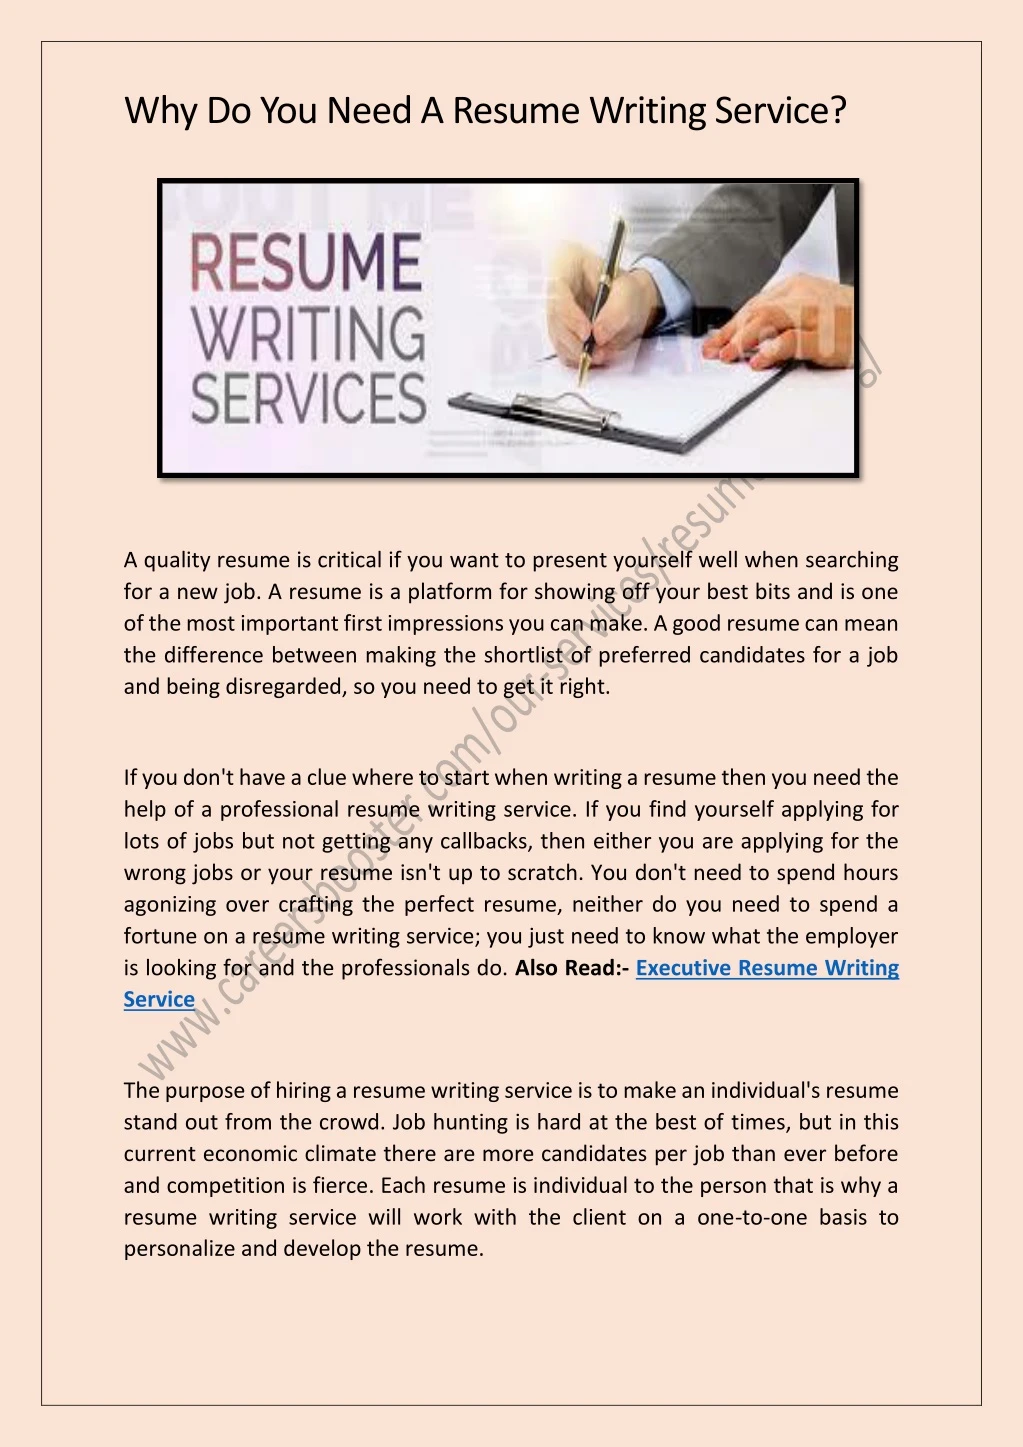 why do you need a resume writing service